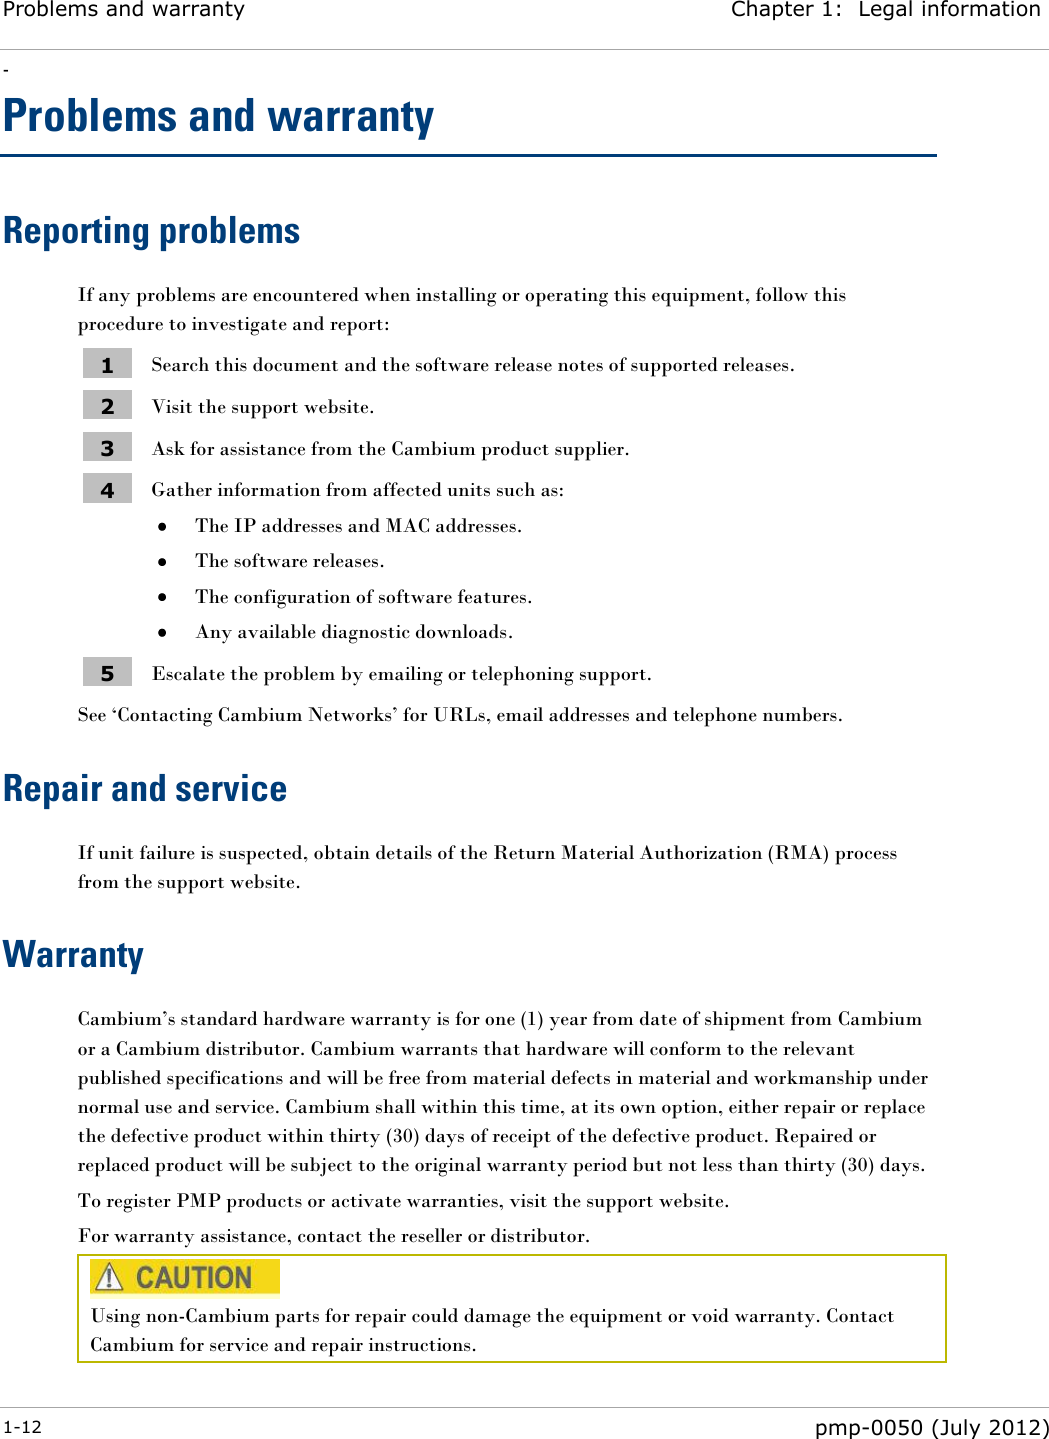 Problems and warranty Chapter 1:  Legal information - 1-12  pmp-0050 (July 2012)  Problems and warranty Reporting problems If any problems are encountered when installing or operating this equipment, follow this procedure to investigate and report: 1 Search this document and the software release notes of supported releases. 2 Visit the support website. 3 Ask for assistance from the Cambium product supplier. 4 Gather information from affected units such as:  The IP addresses and MAC addresses.  The software releases.  The configuration of software features.  Any available diagnostic downloads. 5 Escalate the problem by emailing or telephoning support. See ‗Contacting Cambium Networks‘ for URLs, email addresses and telephone numbers. Repair and service If unit failure is suspected, obtain details of the Return Material Authorization (RMA) process from the support website. Warranty Cambium‘s standard hardware warranty is for one (1) year from date of shipment from Cambium or a Cambium distributor. Cambium warrants that hardware will conform to the relevant published specifications and will be free from material defects in material and workmanship under normal use and service. Cambium shall within this time, at its own option, either repair or replace the defective product within thirty (30) days of receipt of the defective product. Repaired or replaced product will be subject to the original warranty period but not less than thirty (30) days. To register PMP products or activate warranties, visit the support website. For warranty assistance, contact the reseller or distributor.  Using non-Cambium parts for repair could damage the equipment or void warranty. Contact Cambium for service and repair instructions.  